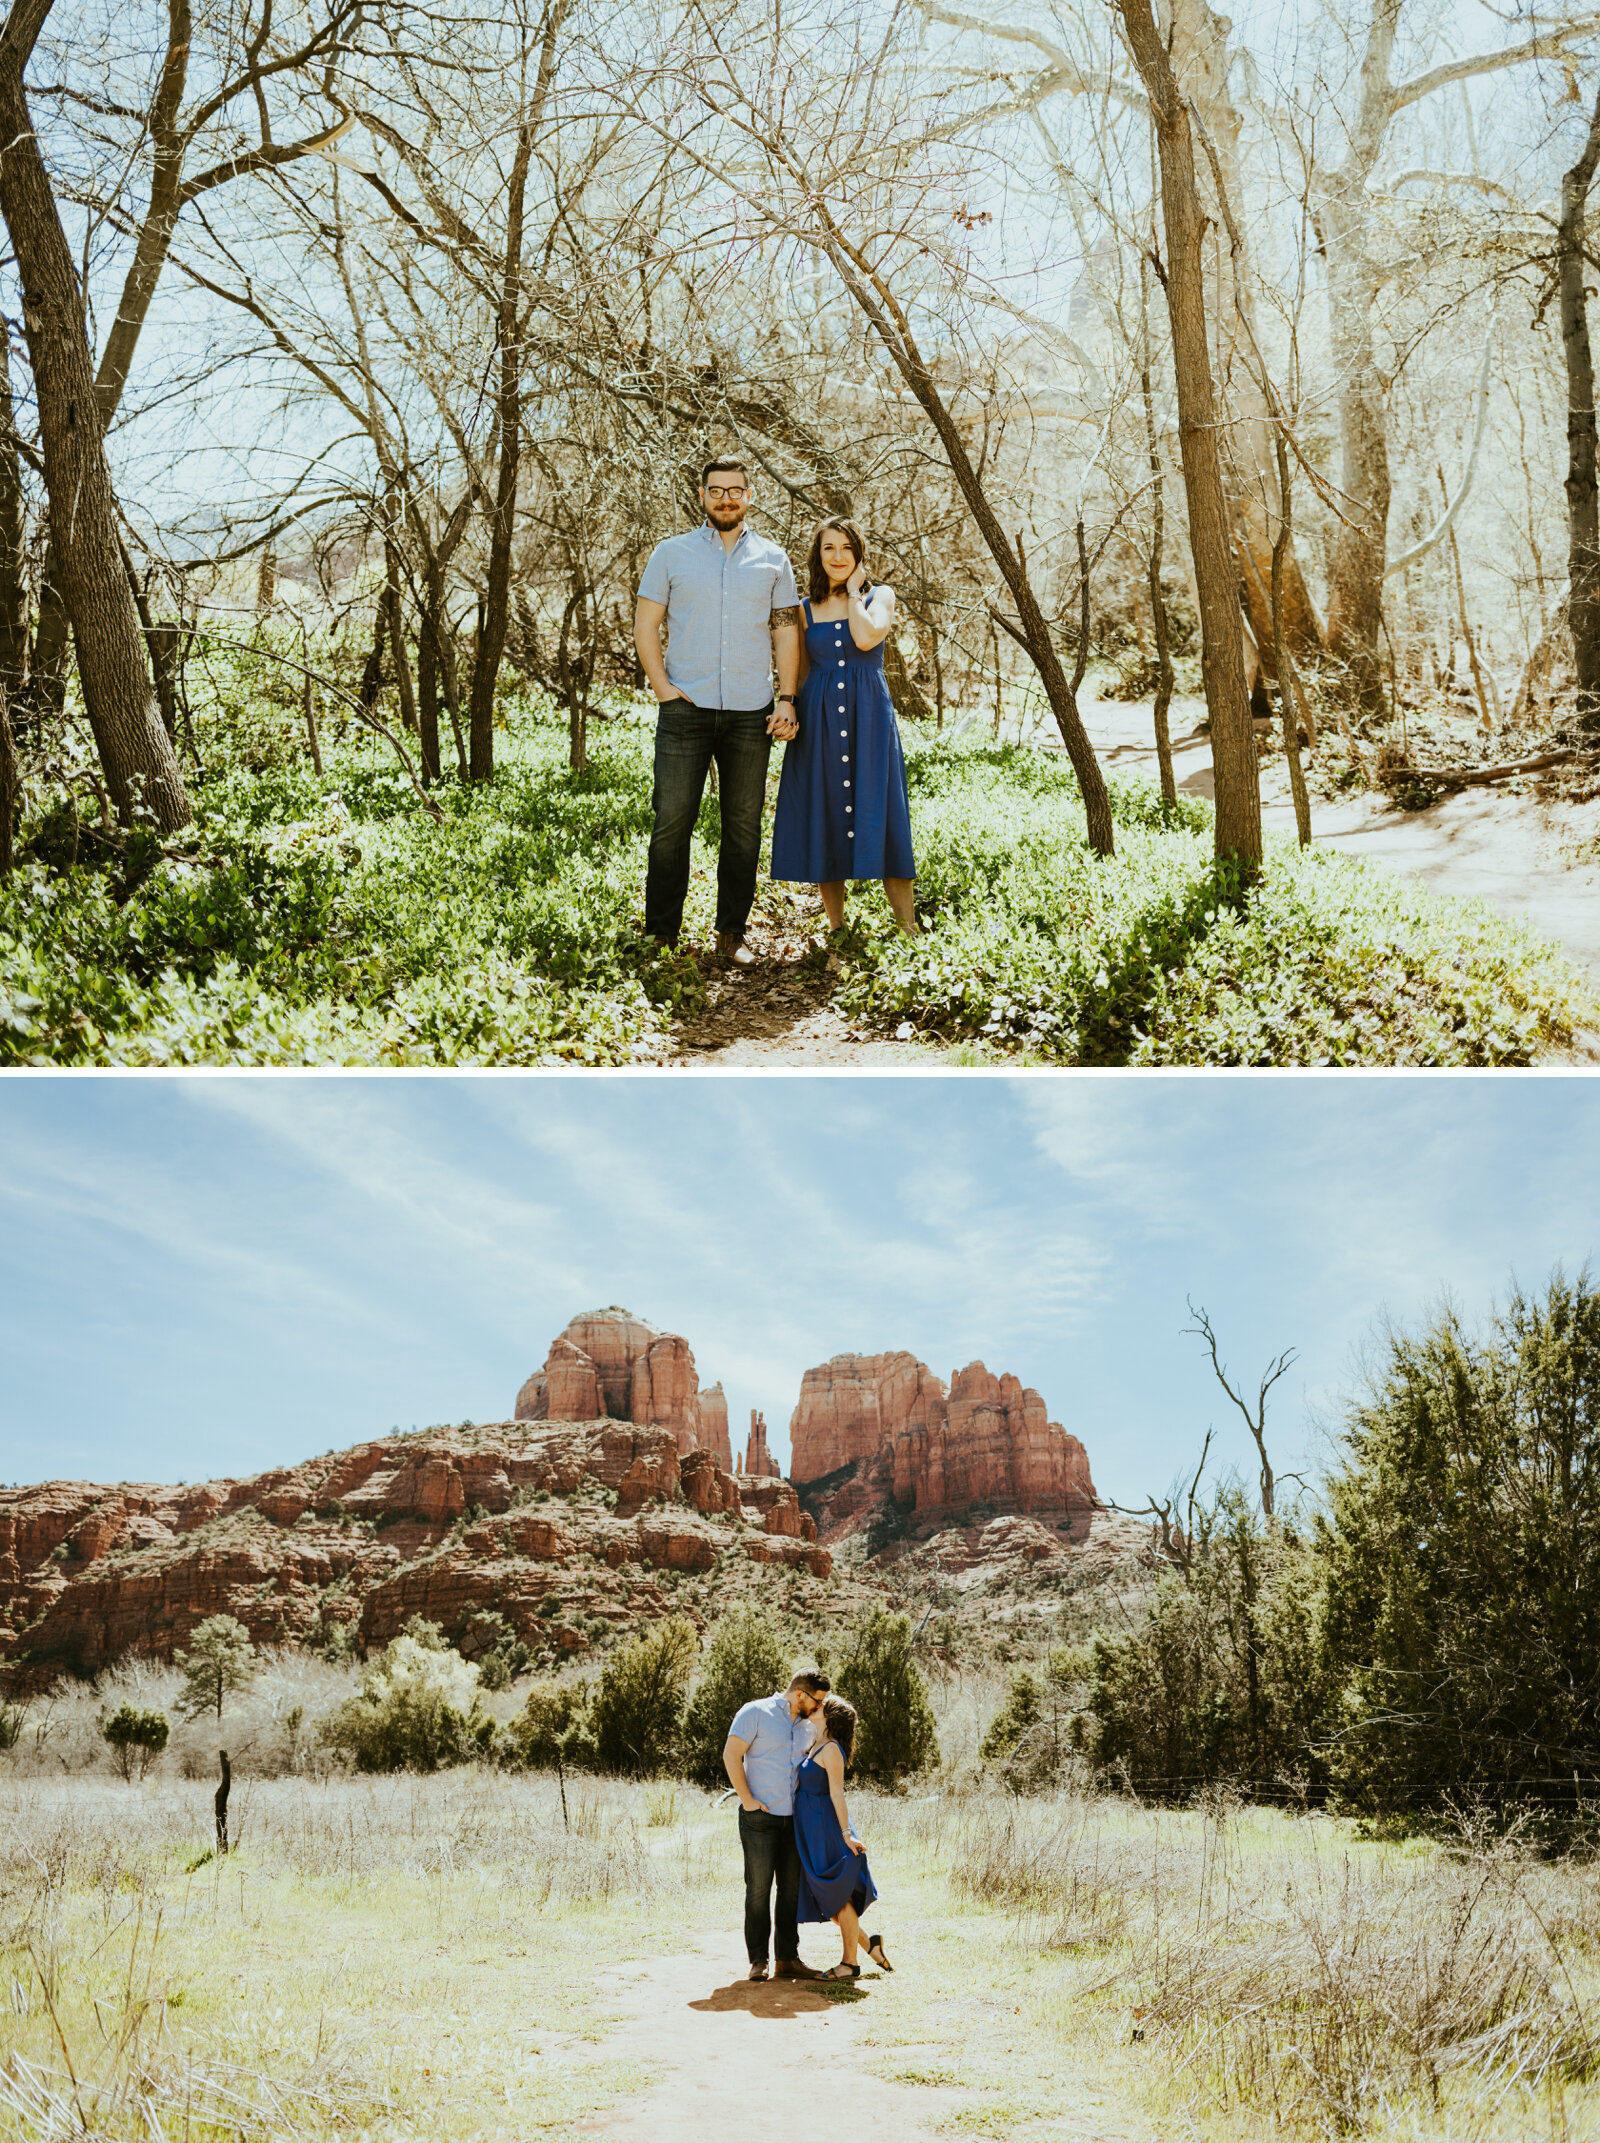 red rock crossing sedona arizona cathedral rock crescent moon ranch couple photos engagement photo outfit inspiration couple posing ideas midday picture-1.jpg